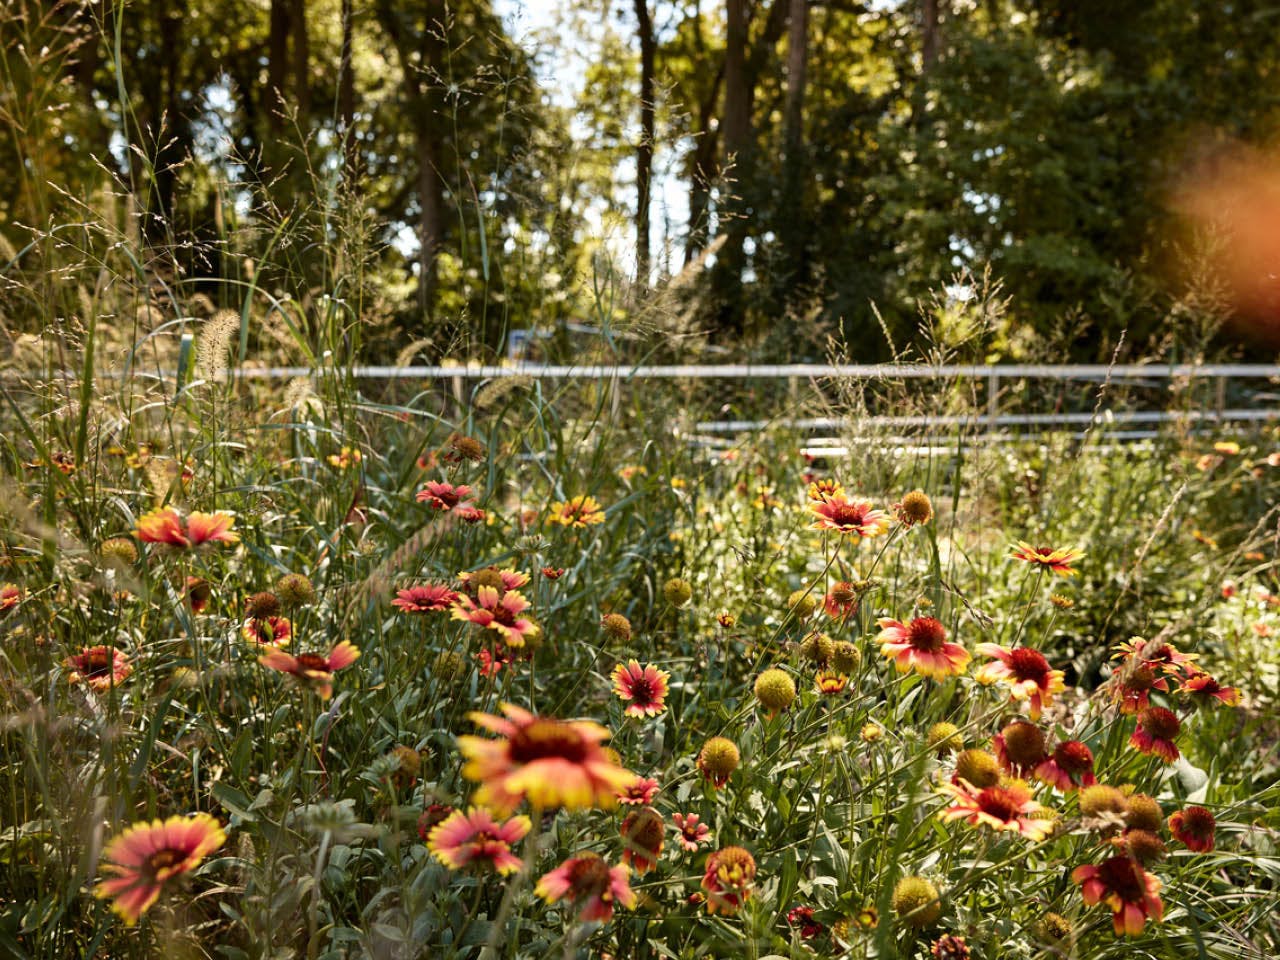 Wildflowers bloom along the Beltline's Southside Trail. Photo by Erin Sintos.